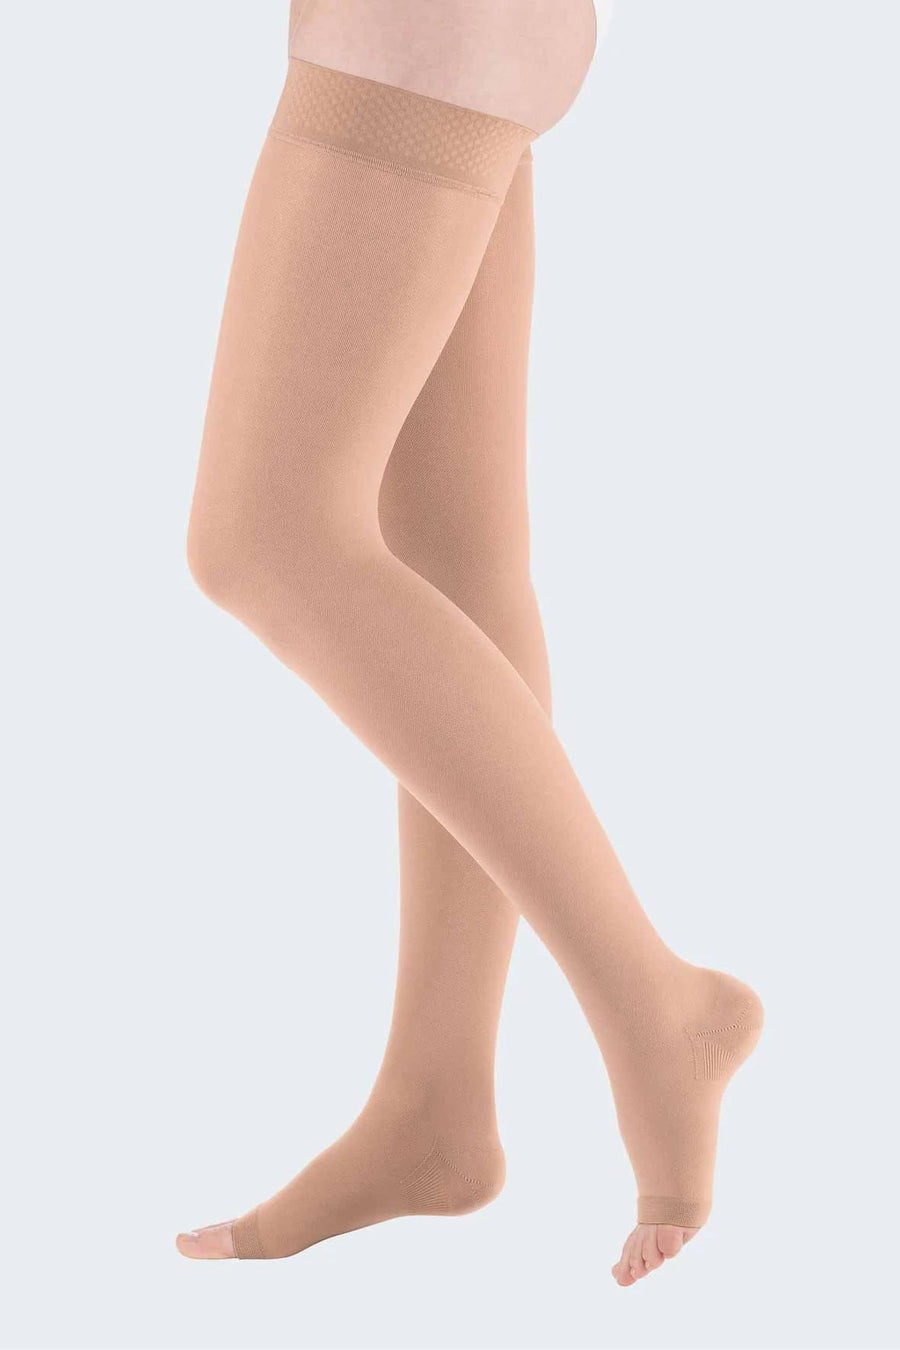 medi-duomed-open-toe-thigh-high-compression-stockings